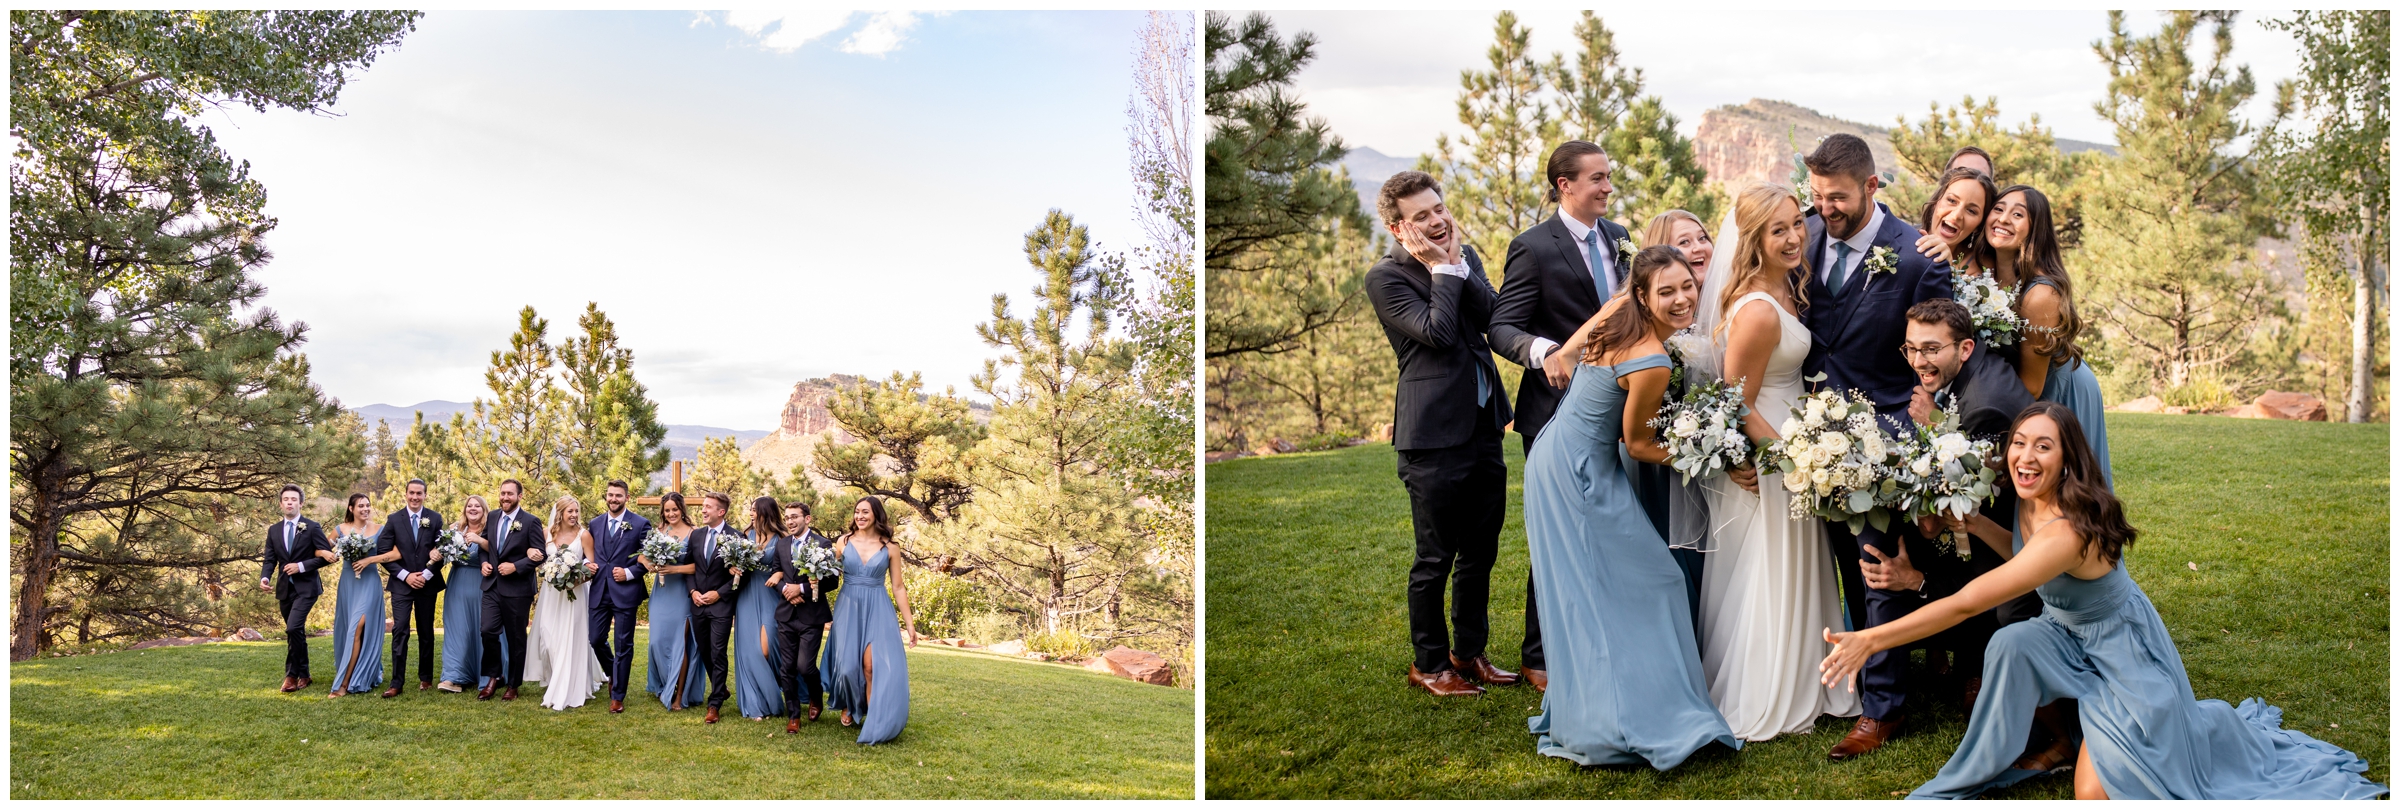 bridal party in light blue and navy blue at Colorado wedding